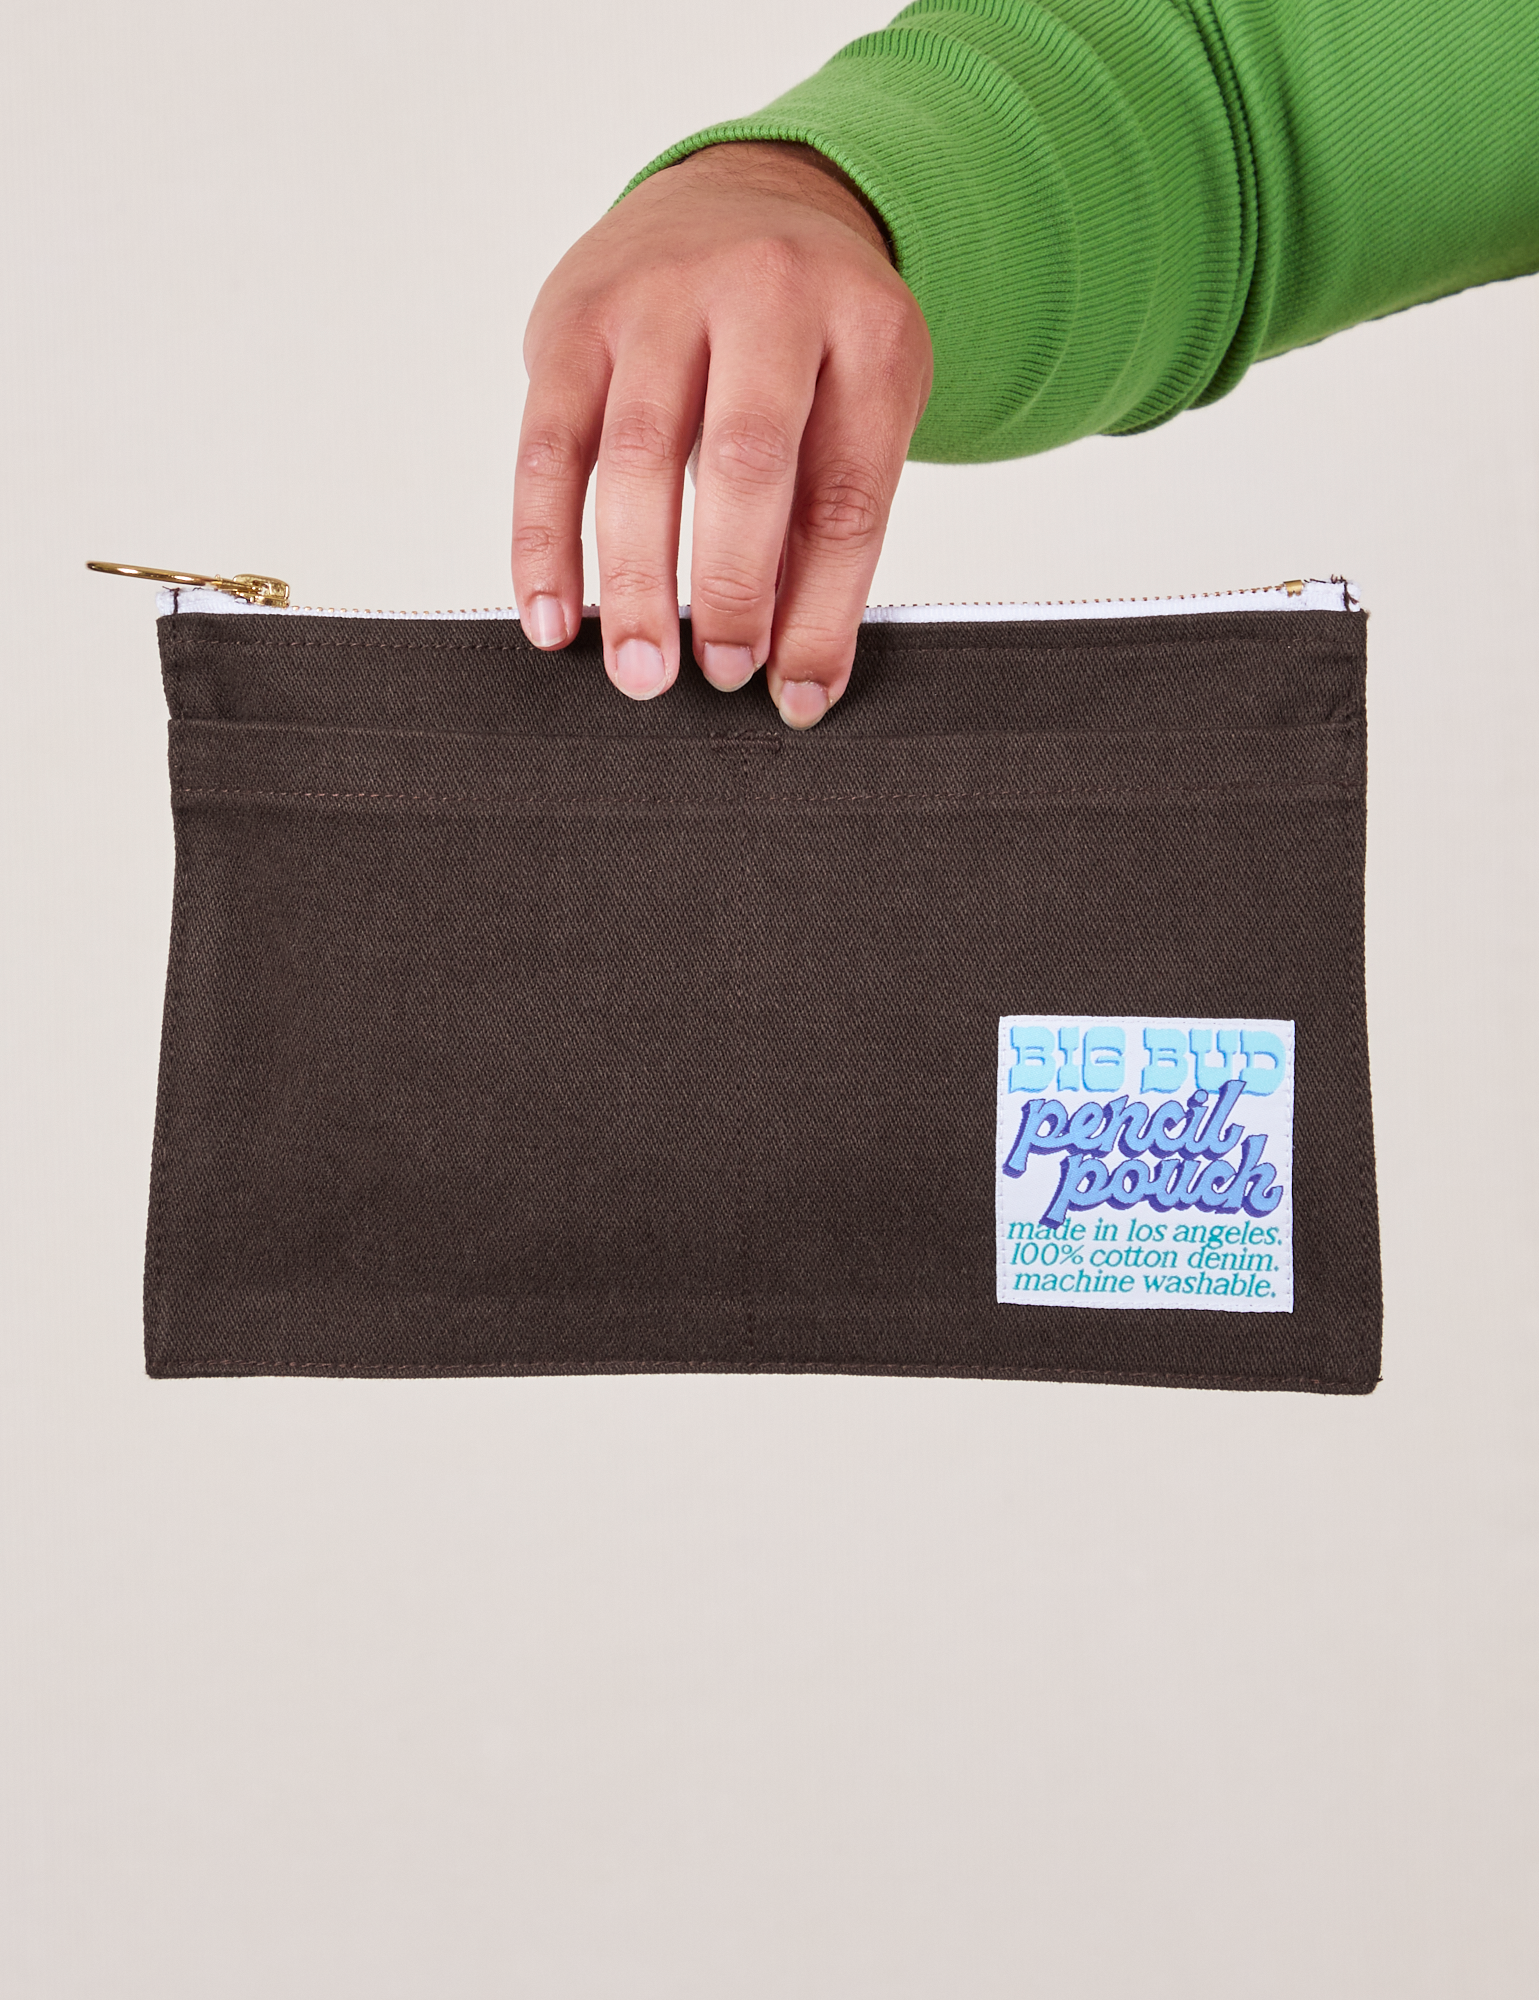 Pencil Pouch in Espresso Brown held by model